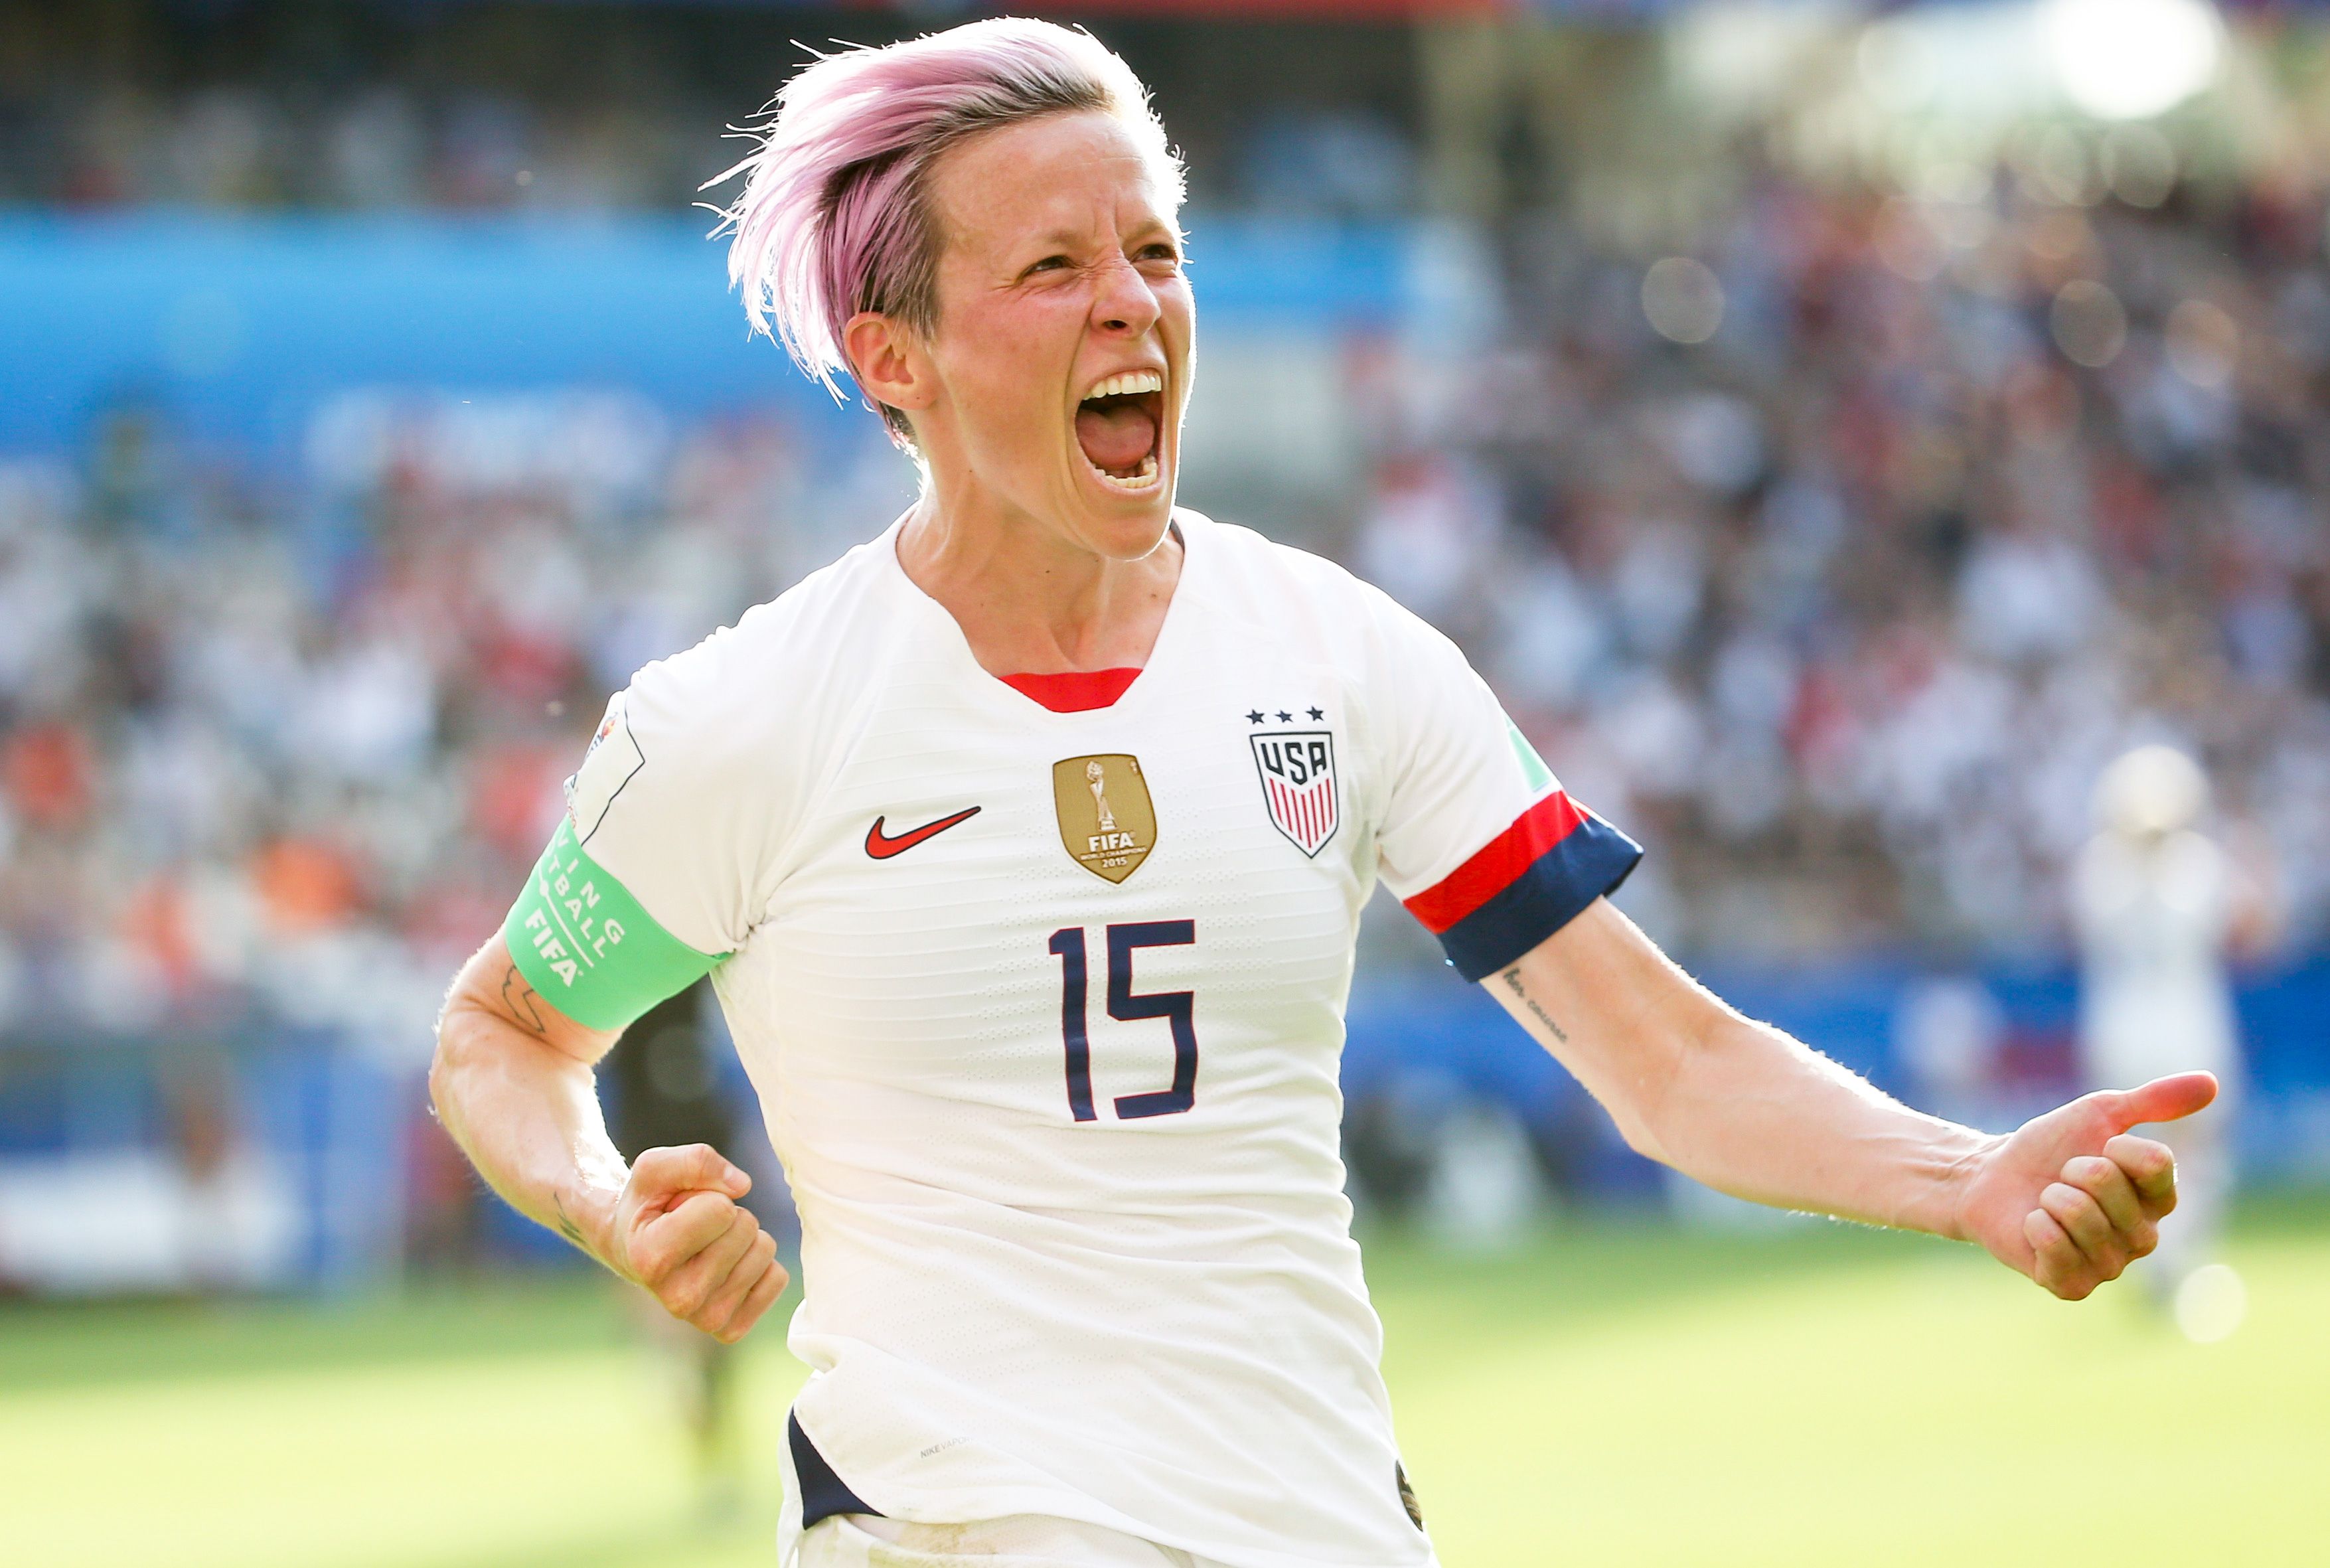 Megan Rapinoe: World Cup Winner and Queer American Sports Icon.